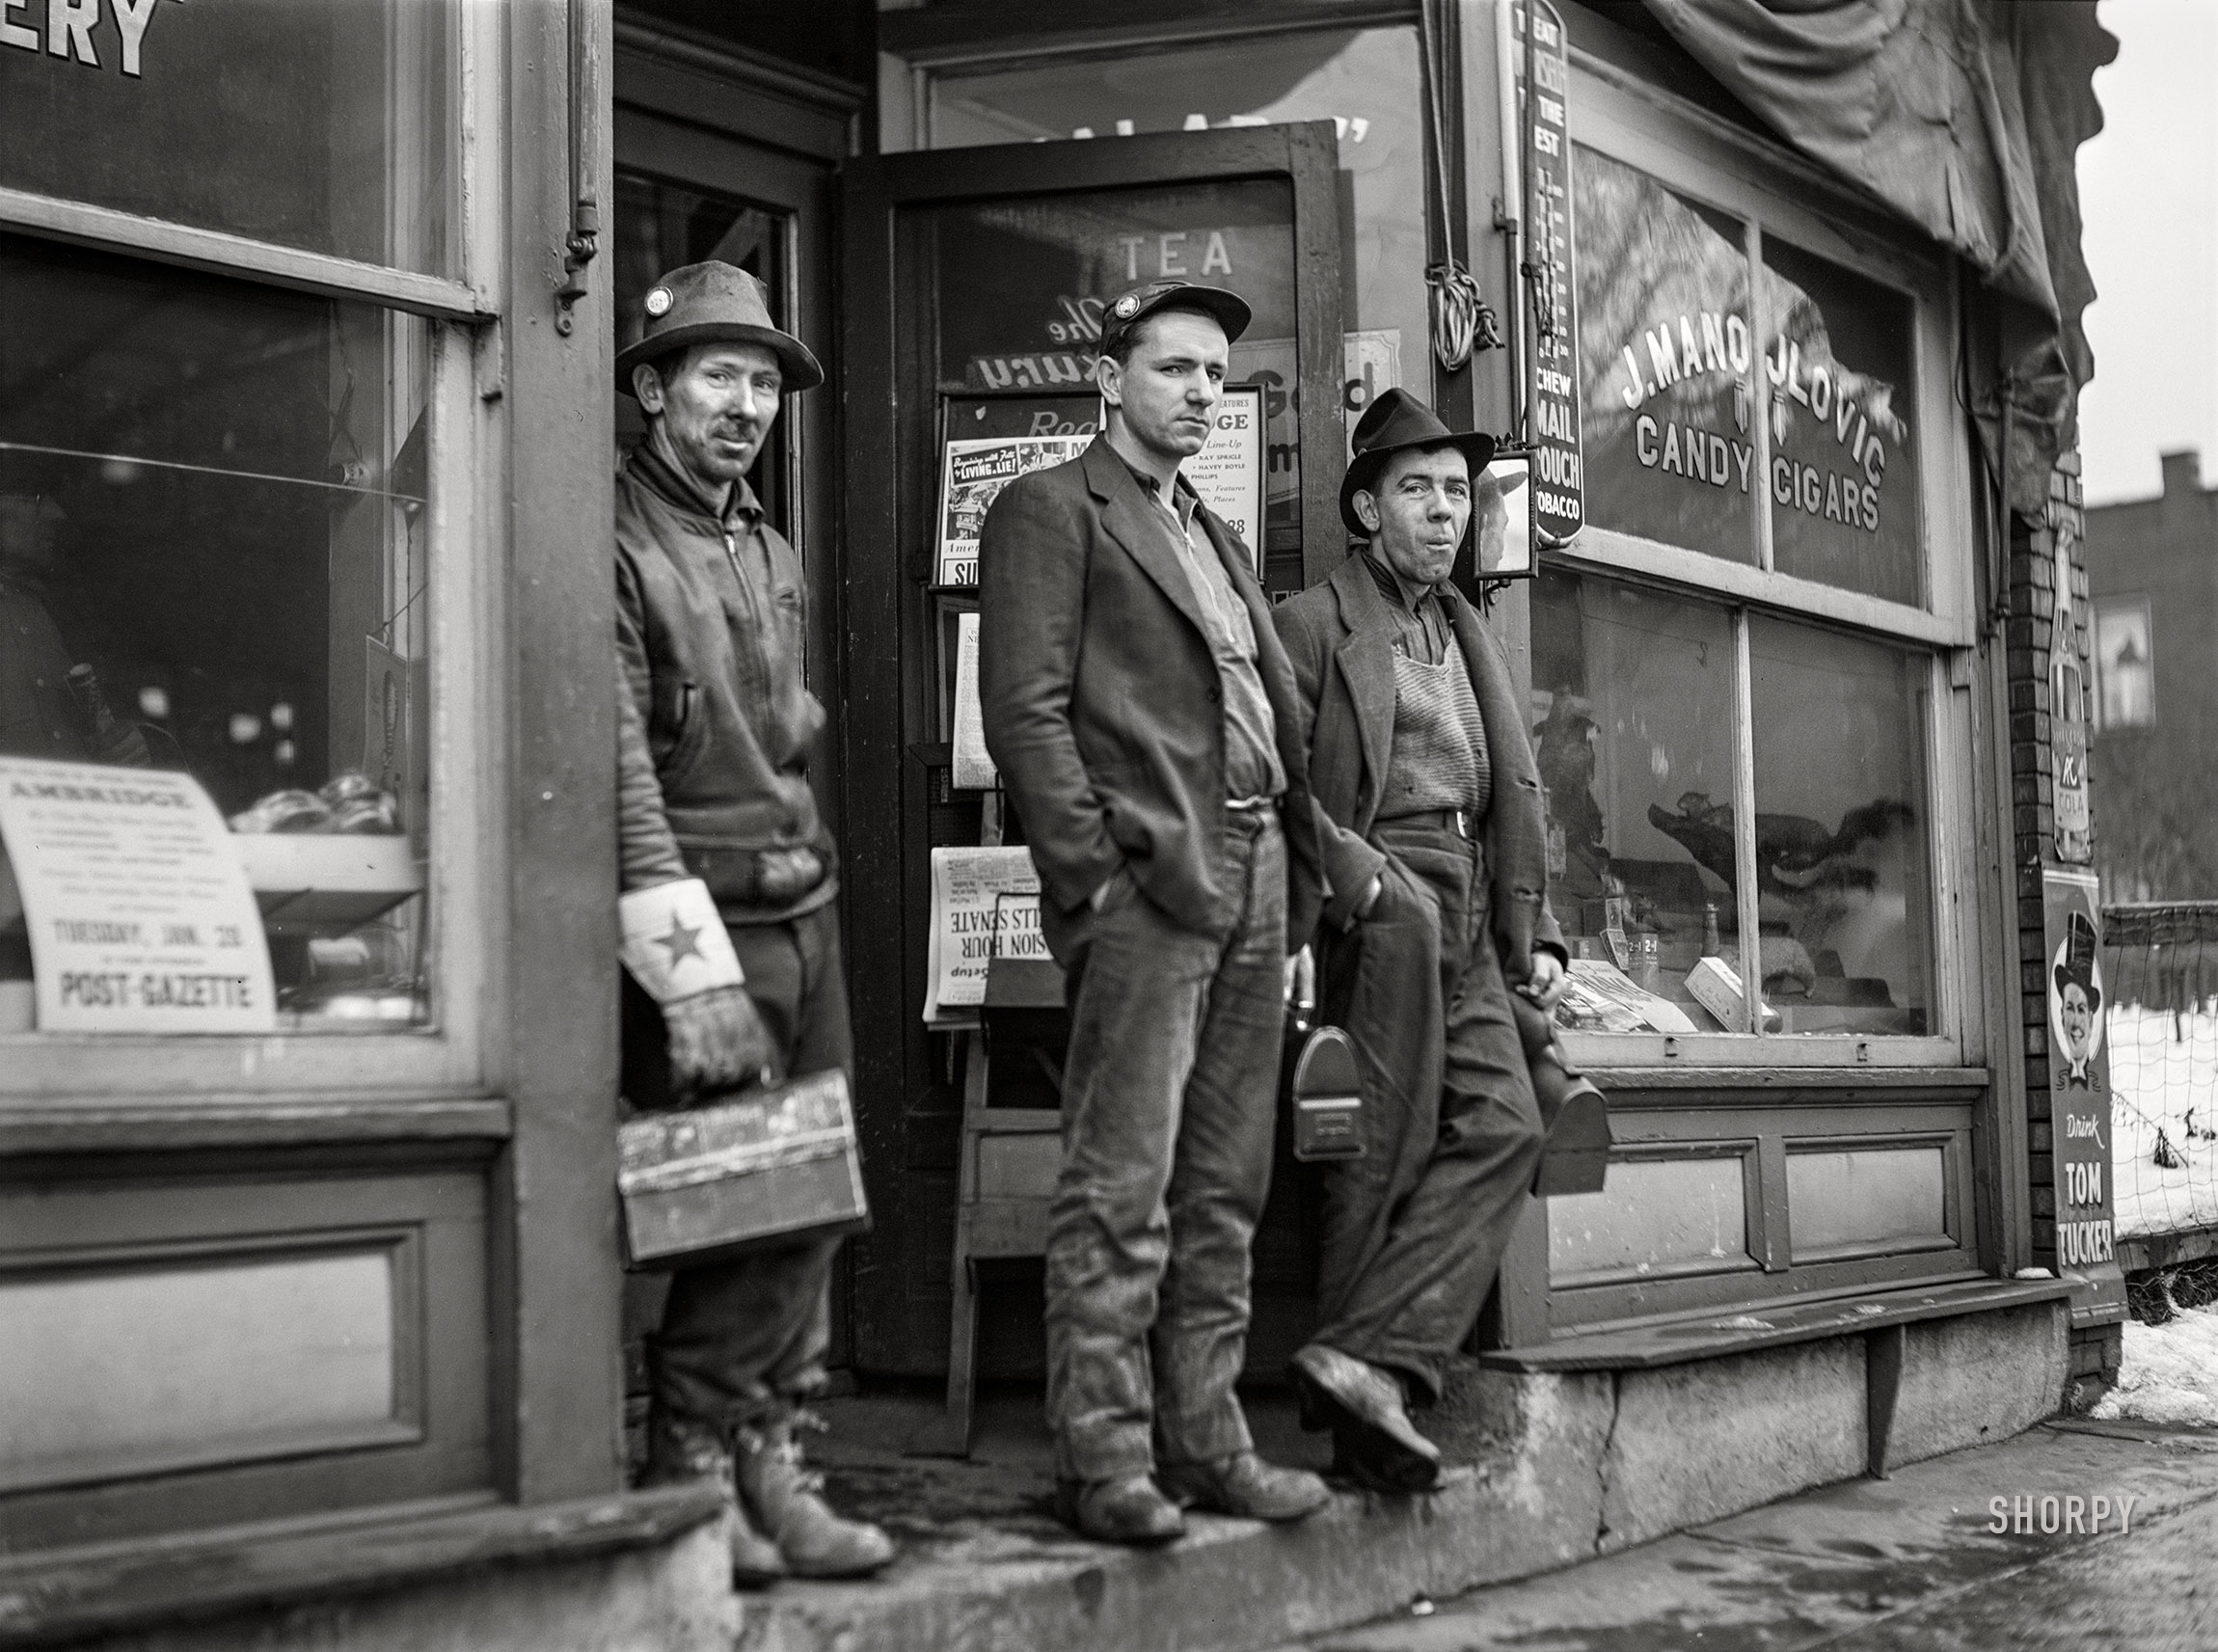 January 1941. Ambridge, Pennsylvania. "Employees of American Bridge Company (United States Steel) waiting for the bus." Acetate negative by John Vachon. View full size.